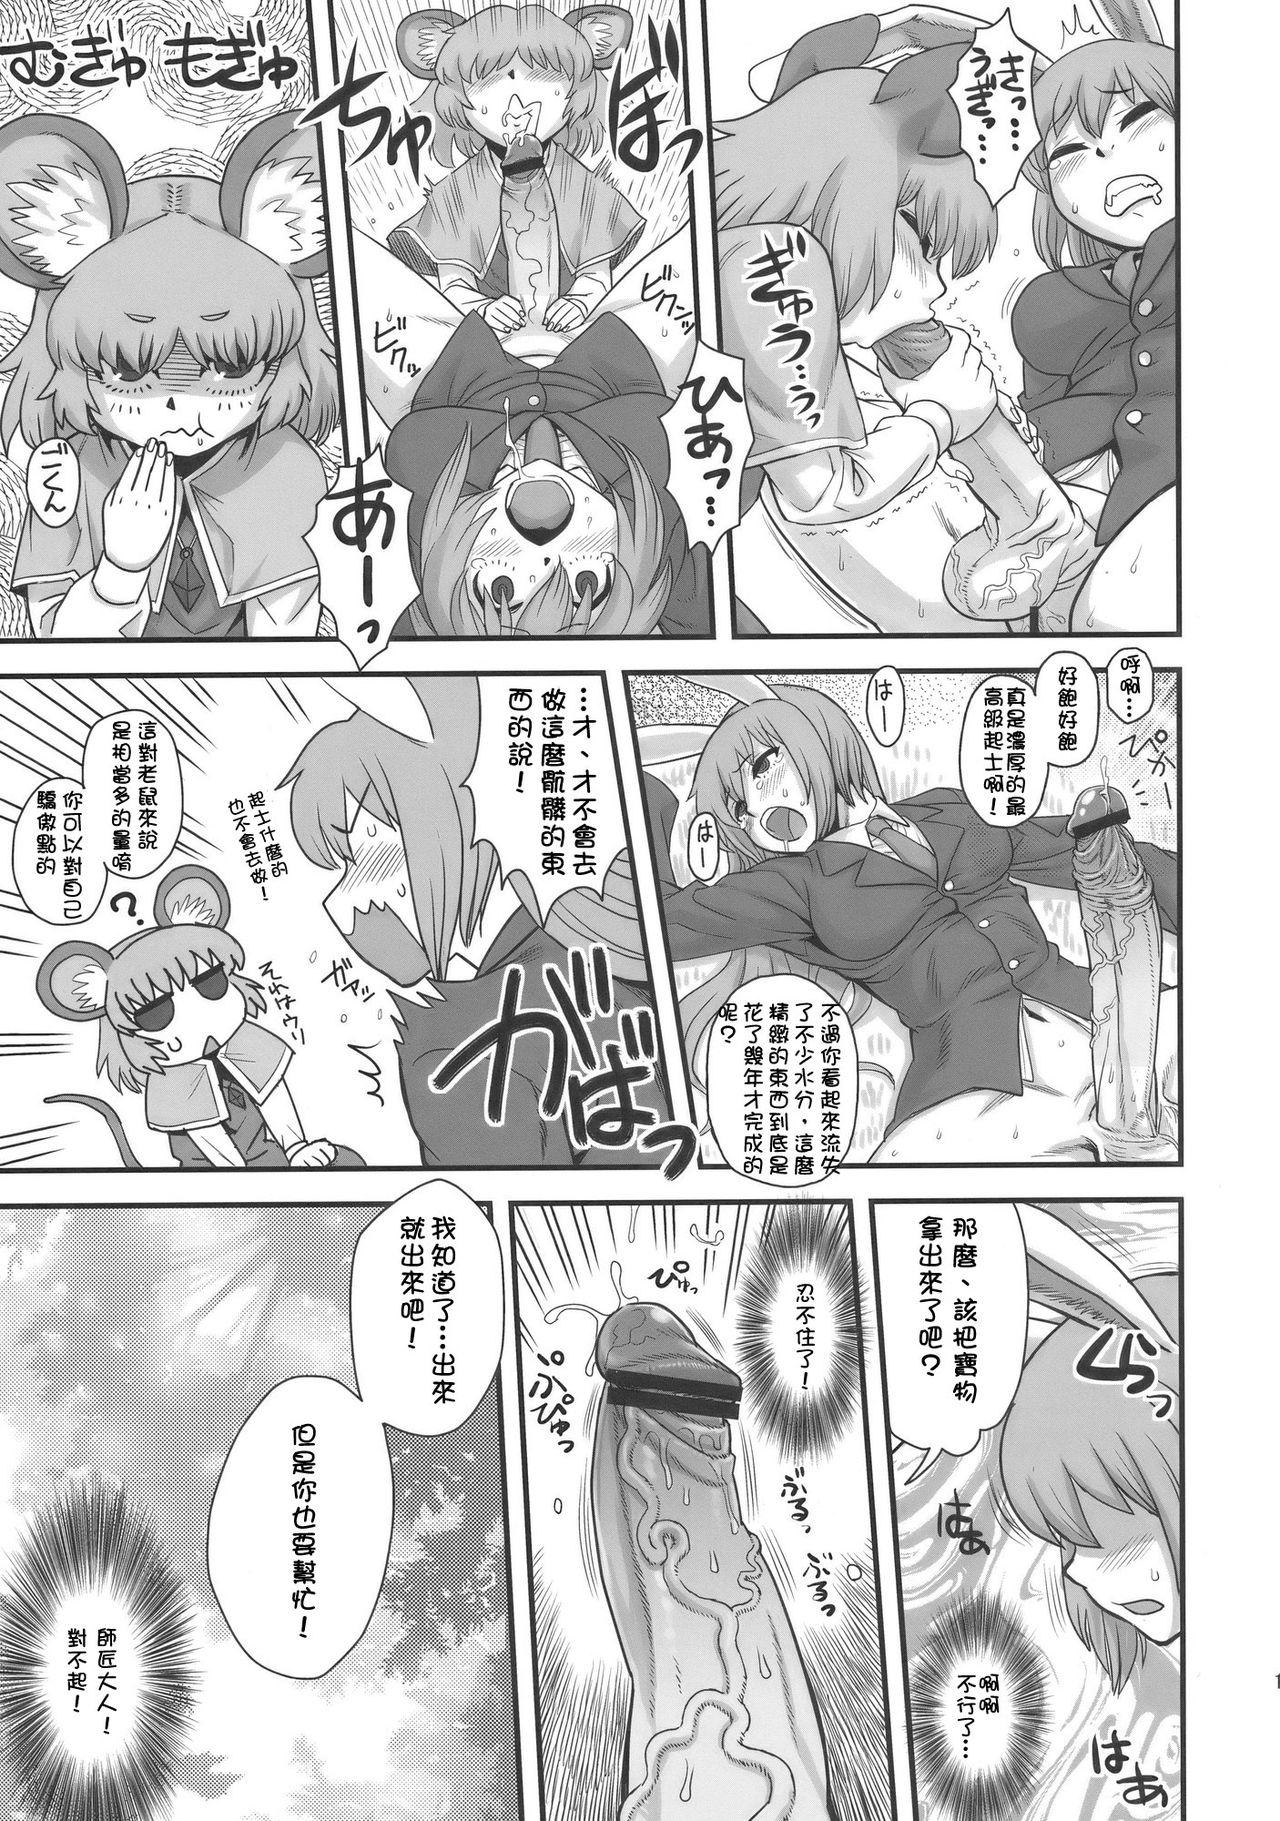 Orgasmo Lunatic Udon - Touhou project Sapphic Erotica - Page 11